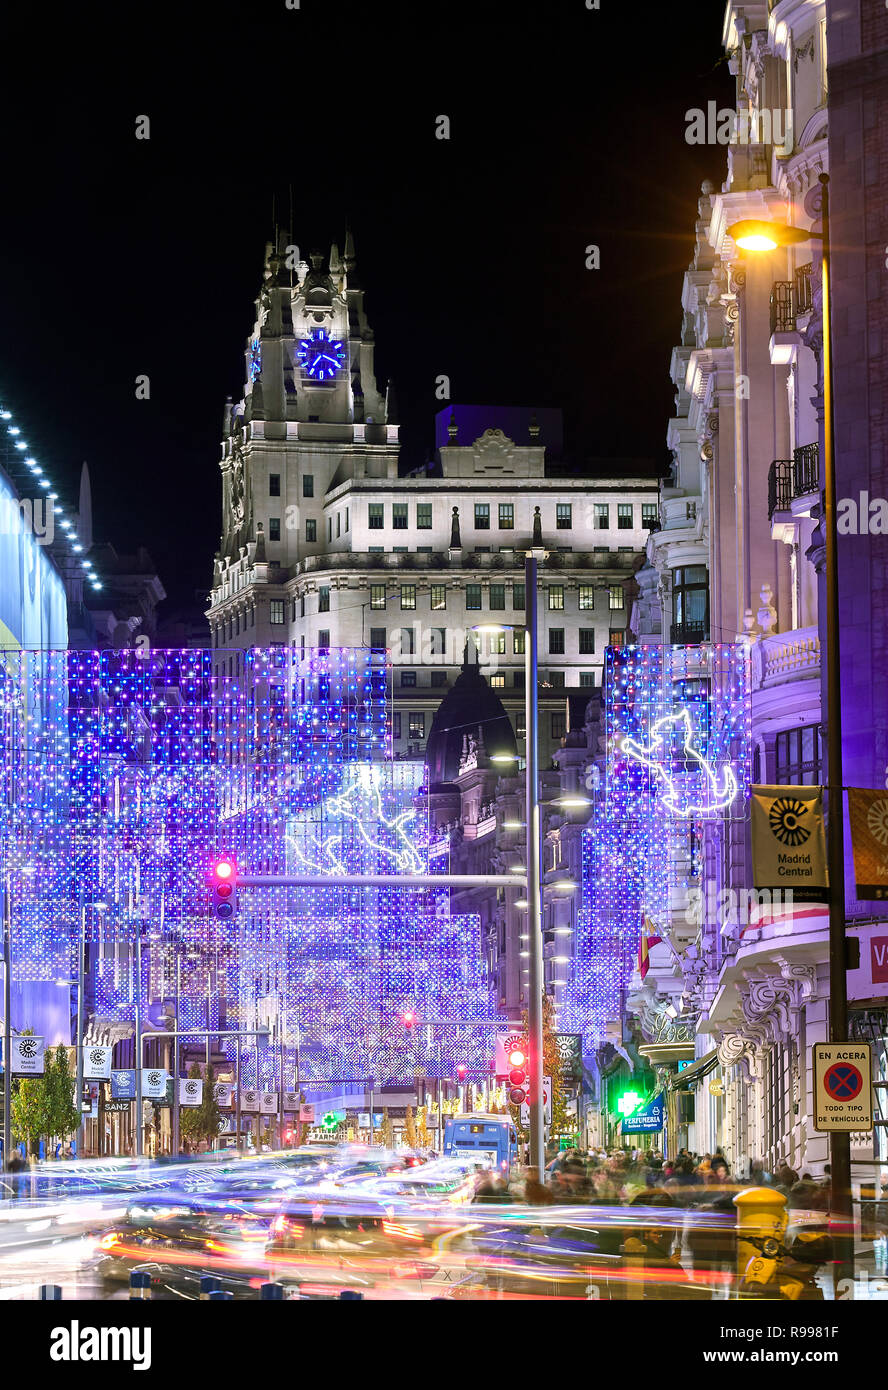 Madrid A Natale.Christmas Lights At Gran Via Street With Telefonica Building At The Background Madrid Spain Stock Photo Alamy